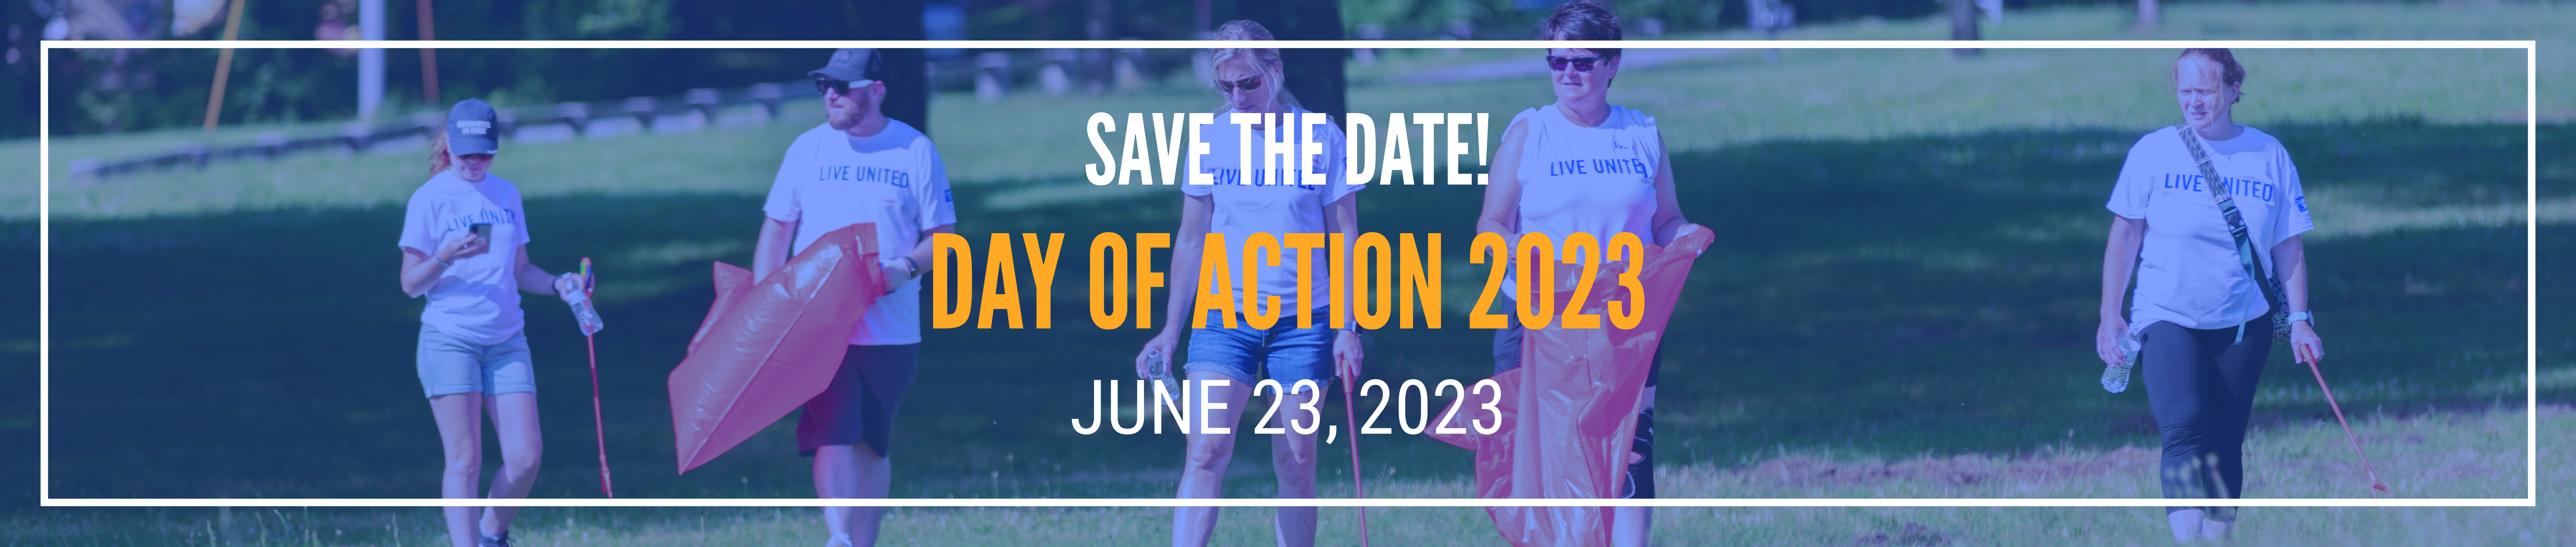 Day of Action Save the Date 2023